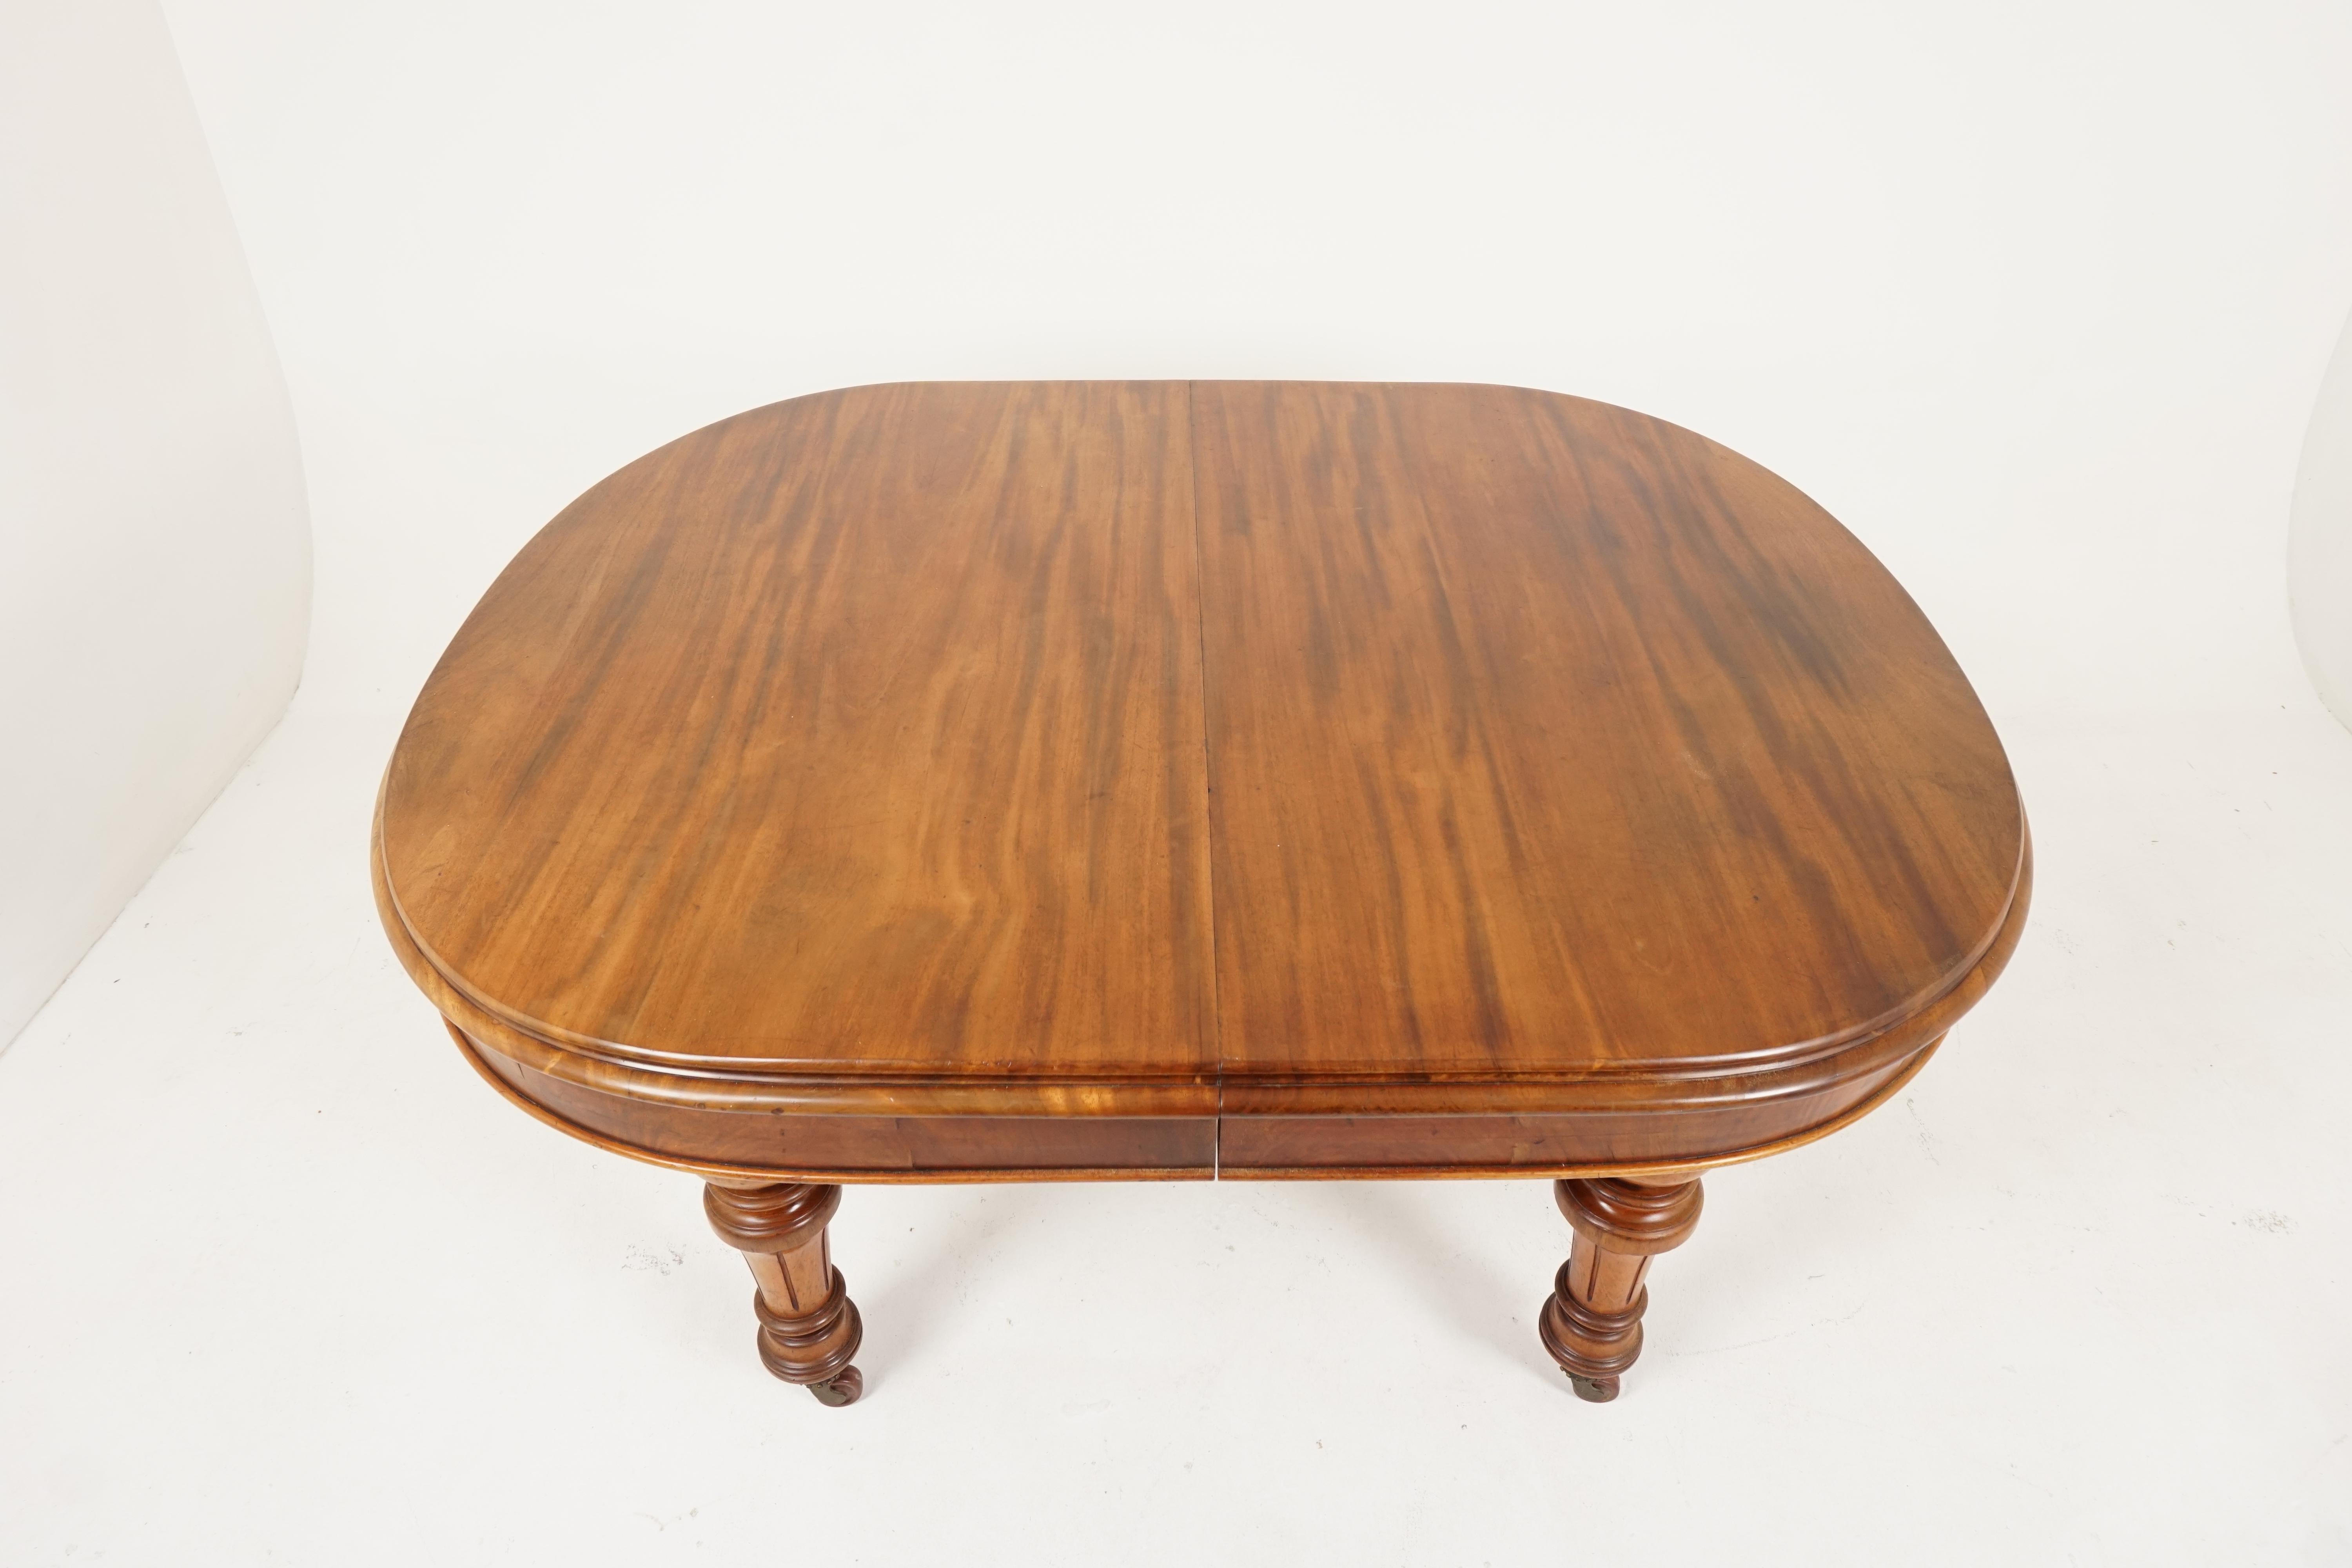 Scottish Antique Victorian Walnut Extending Dining Table with 2 Leaves, Scotland, 1880